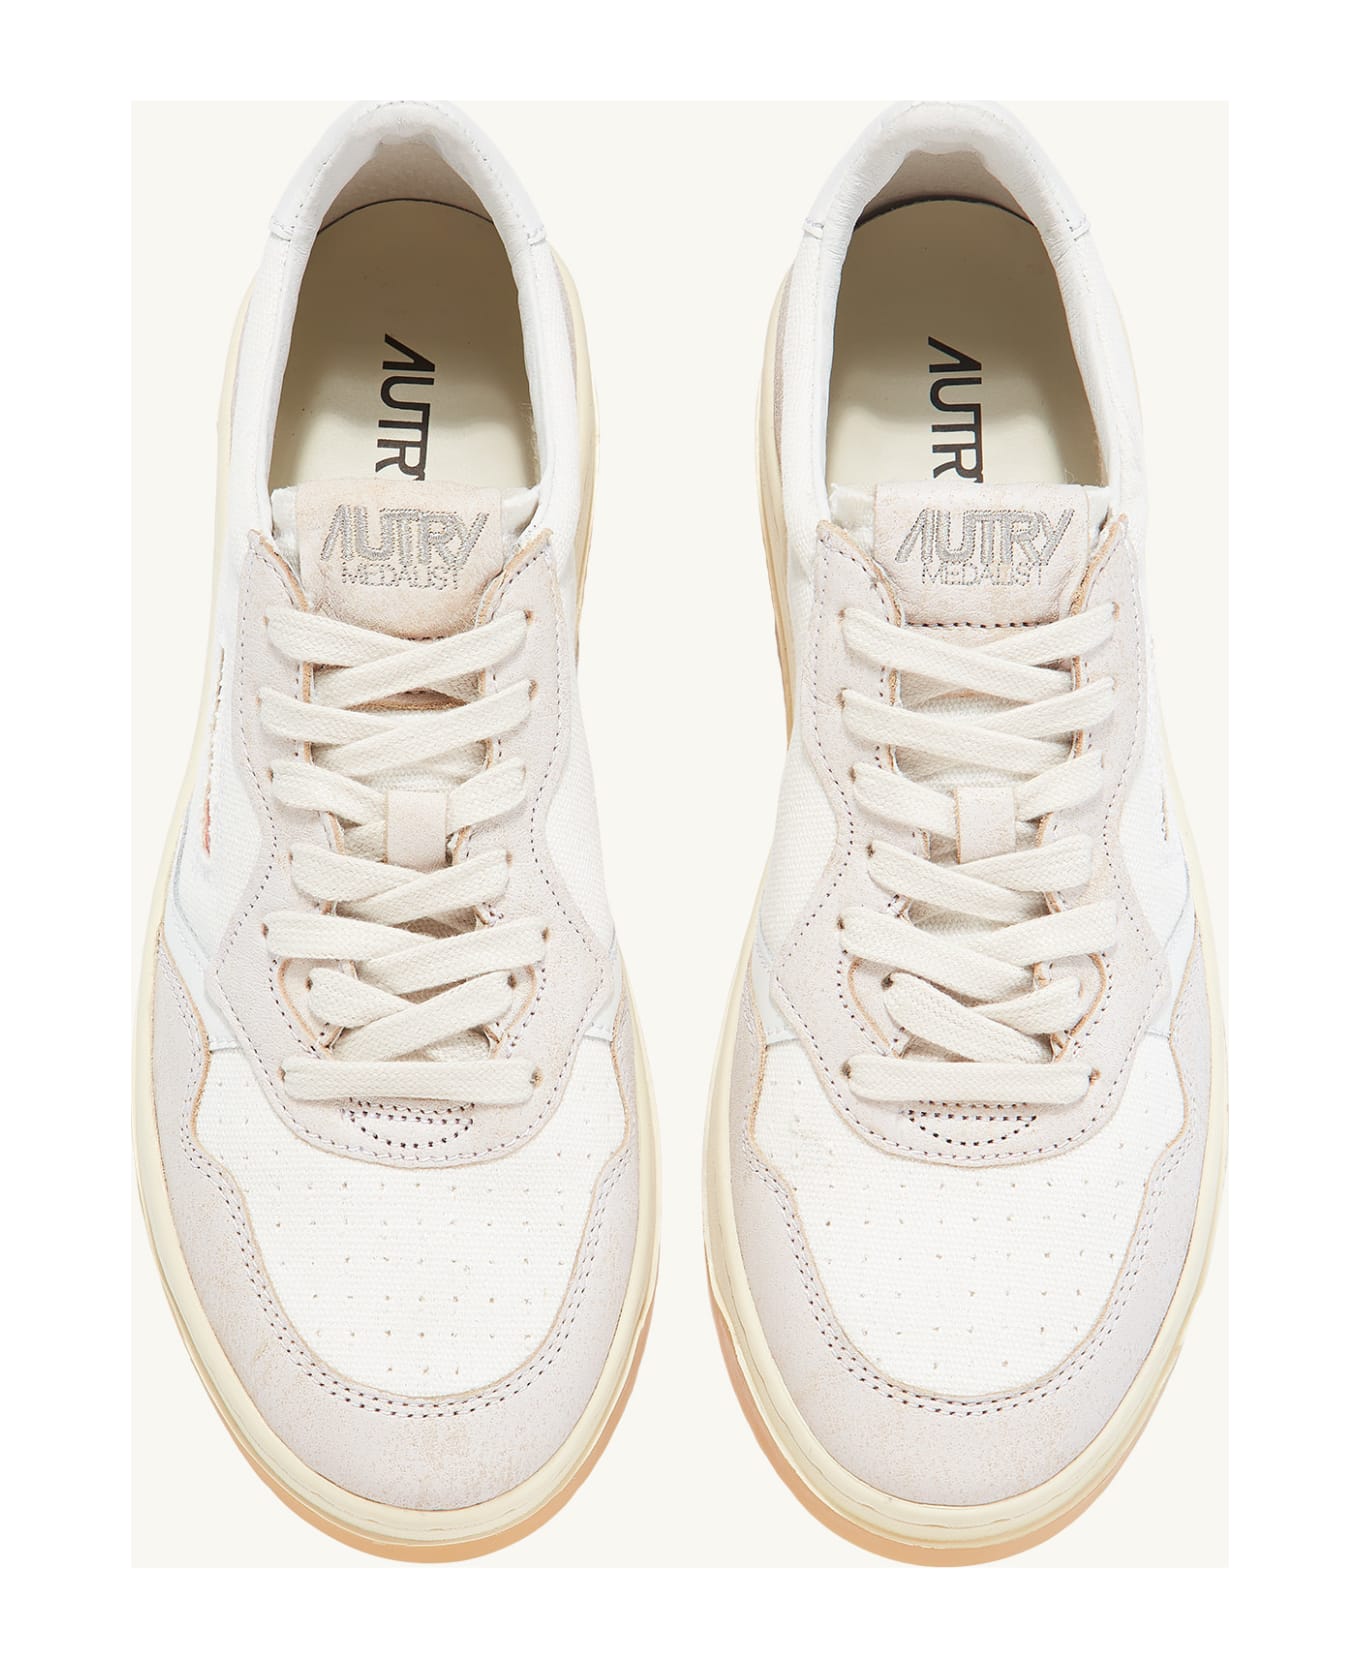 Autry 'medalist' Sneakers - White スニーカー